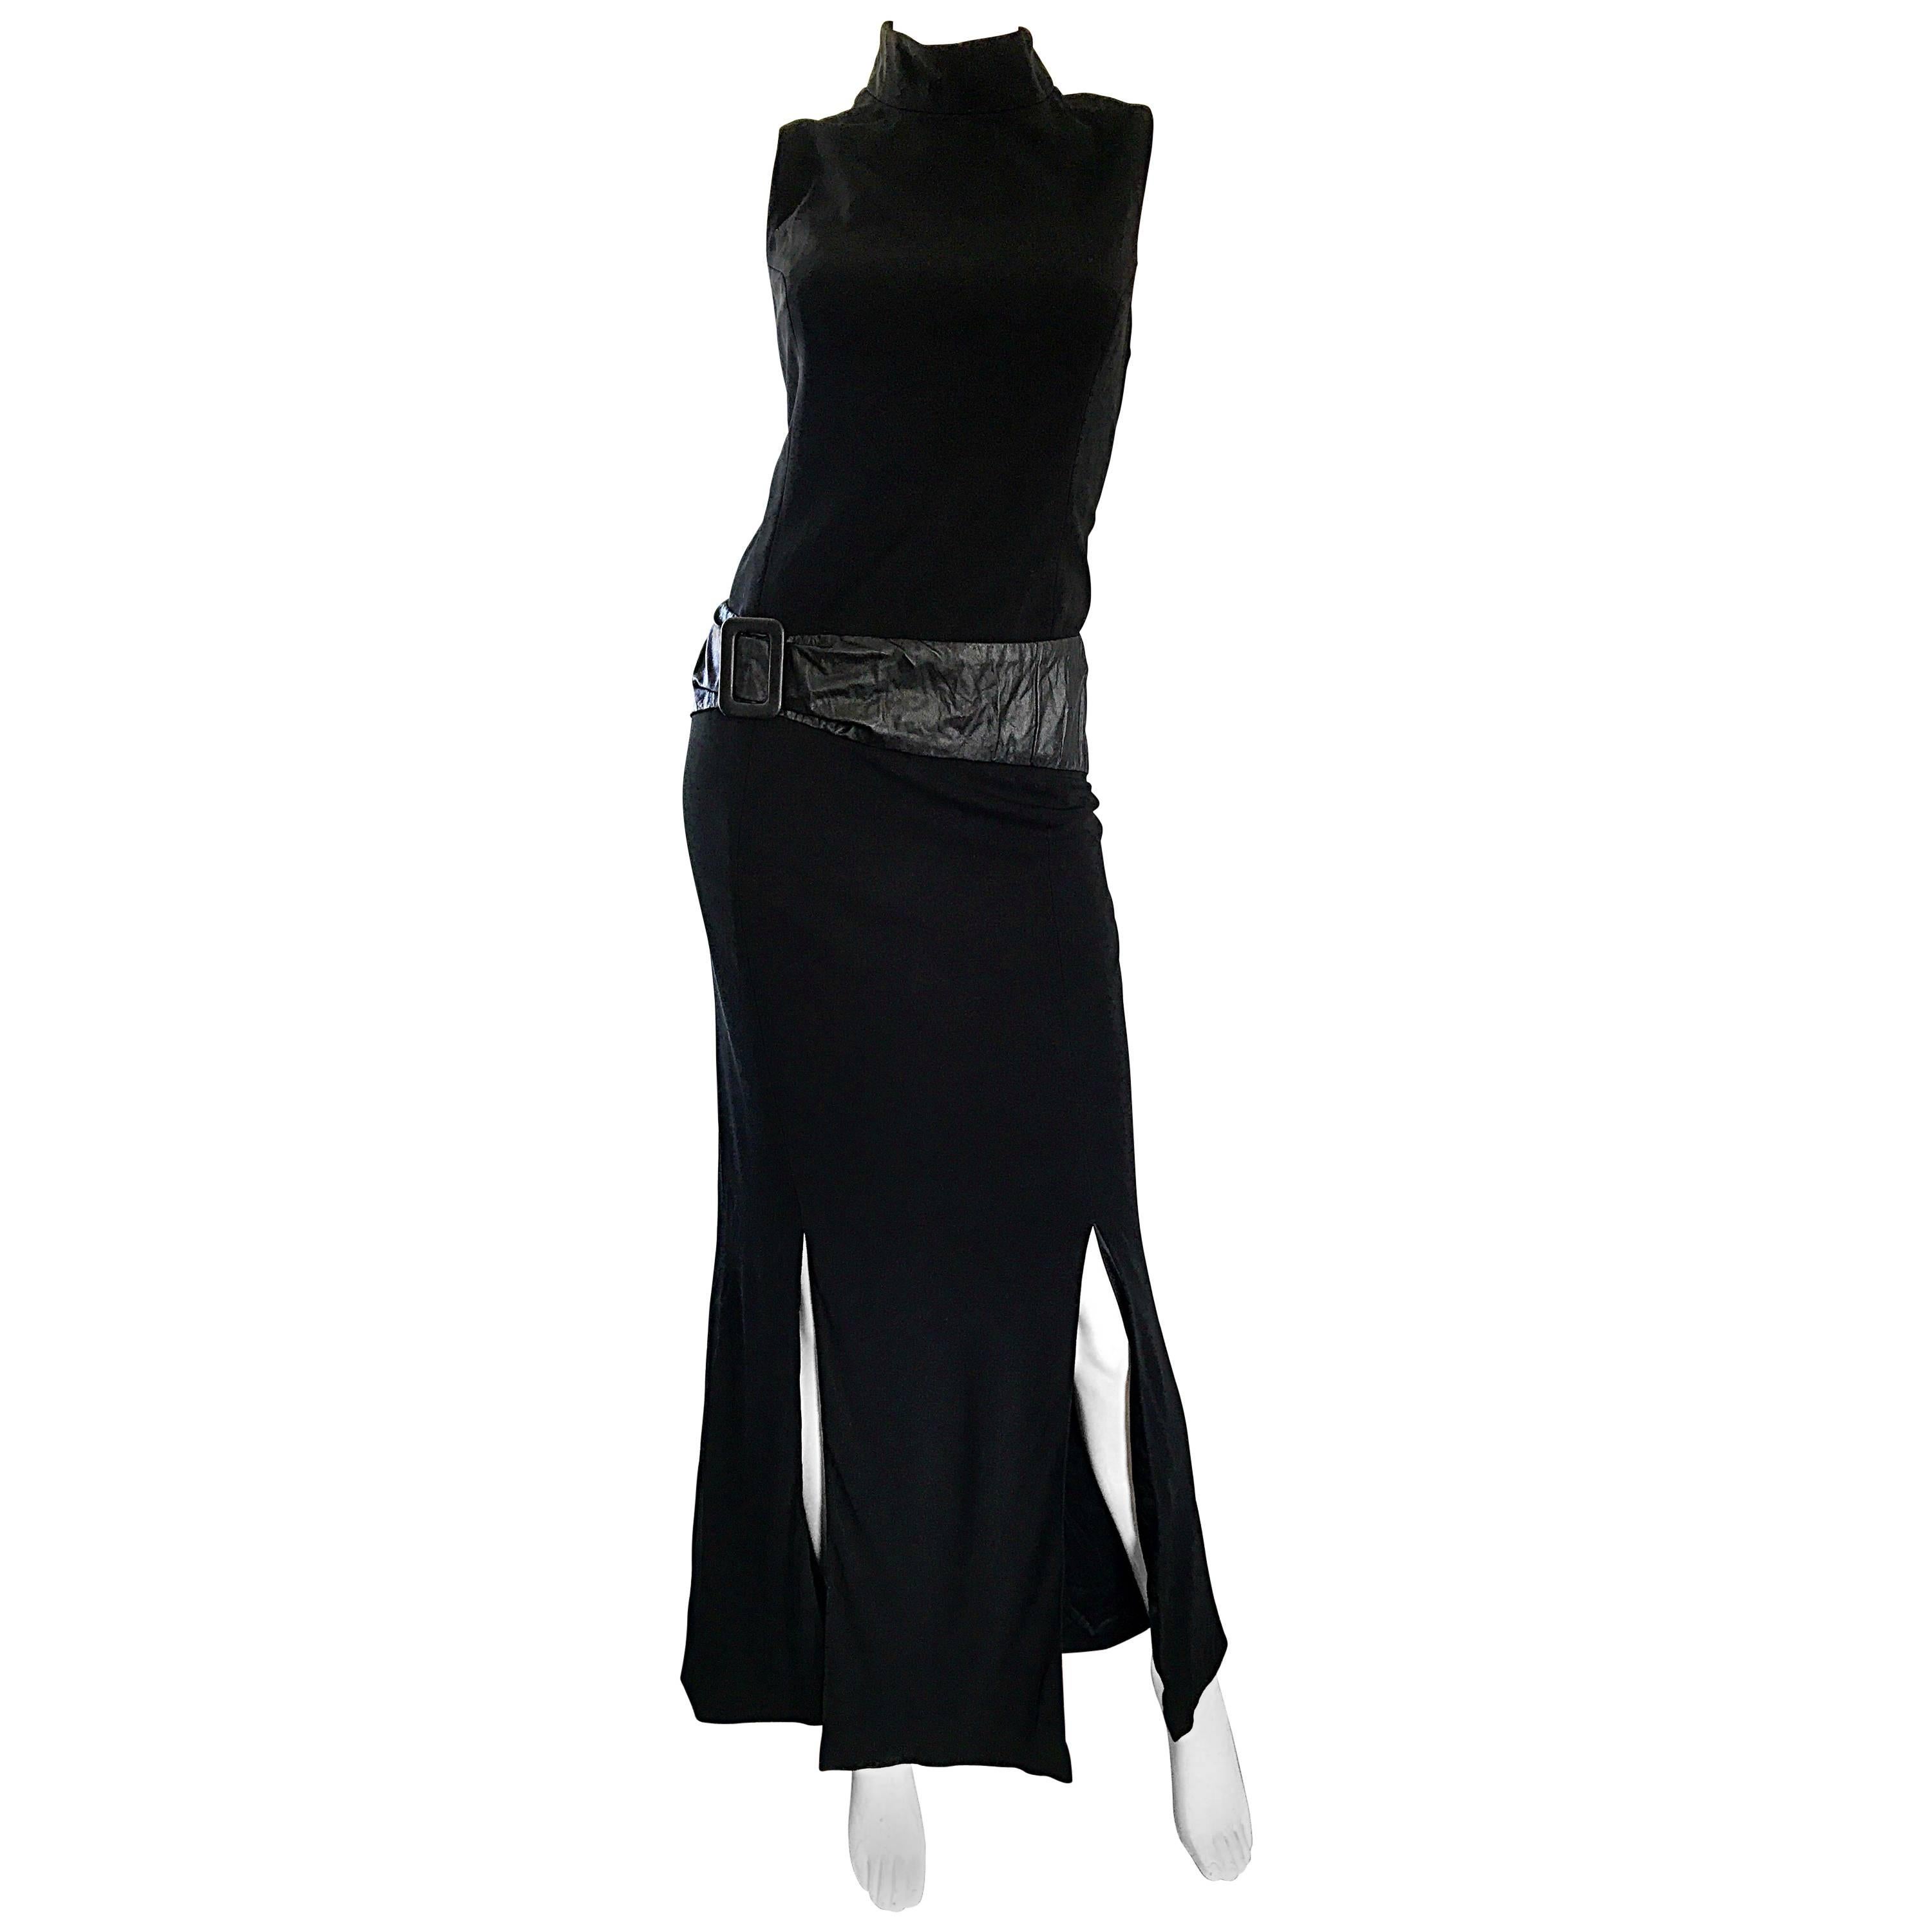 C.D Greene 1990s Plus Size 16 - 18 Black Rayon + Leather High Neck Evening Dress For Sale